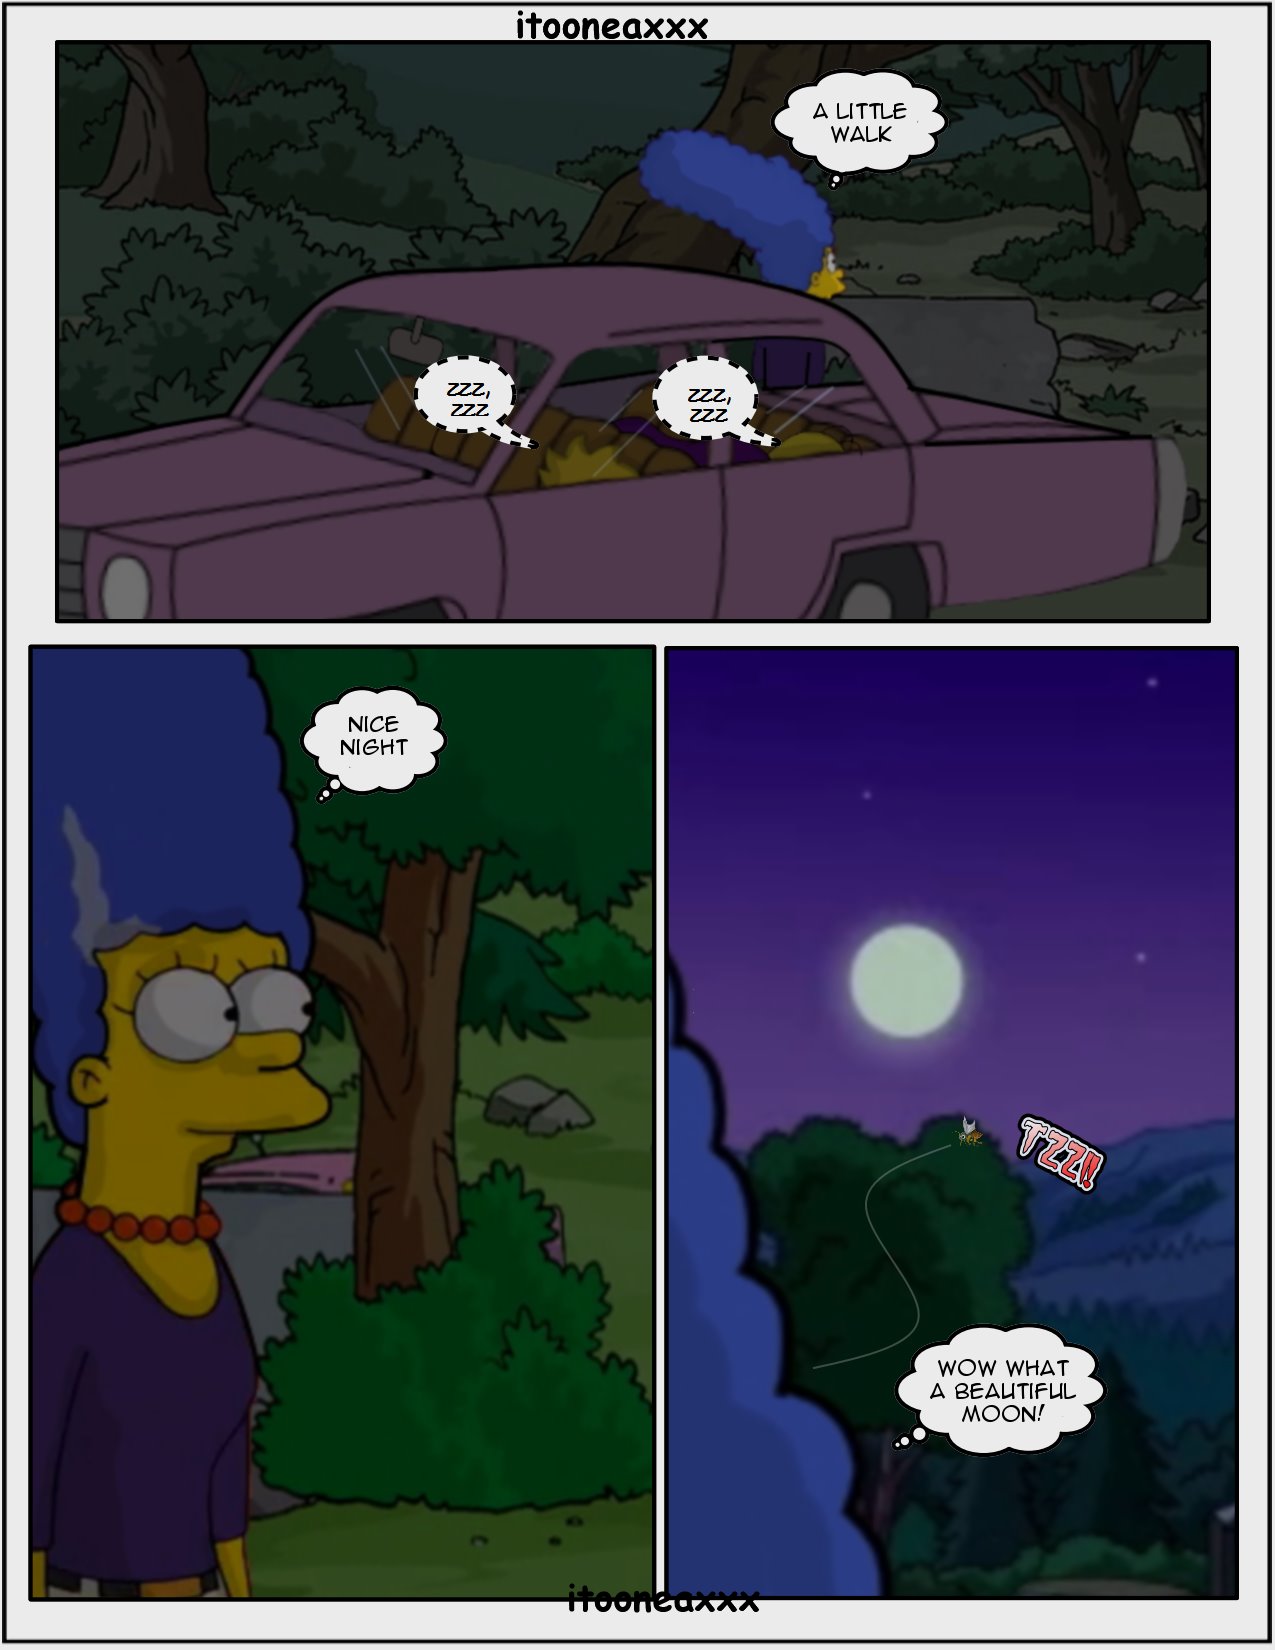 The Simpsons – Affinity 3 by Itooneaxxx